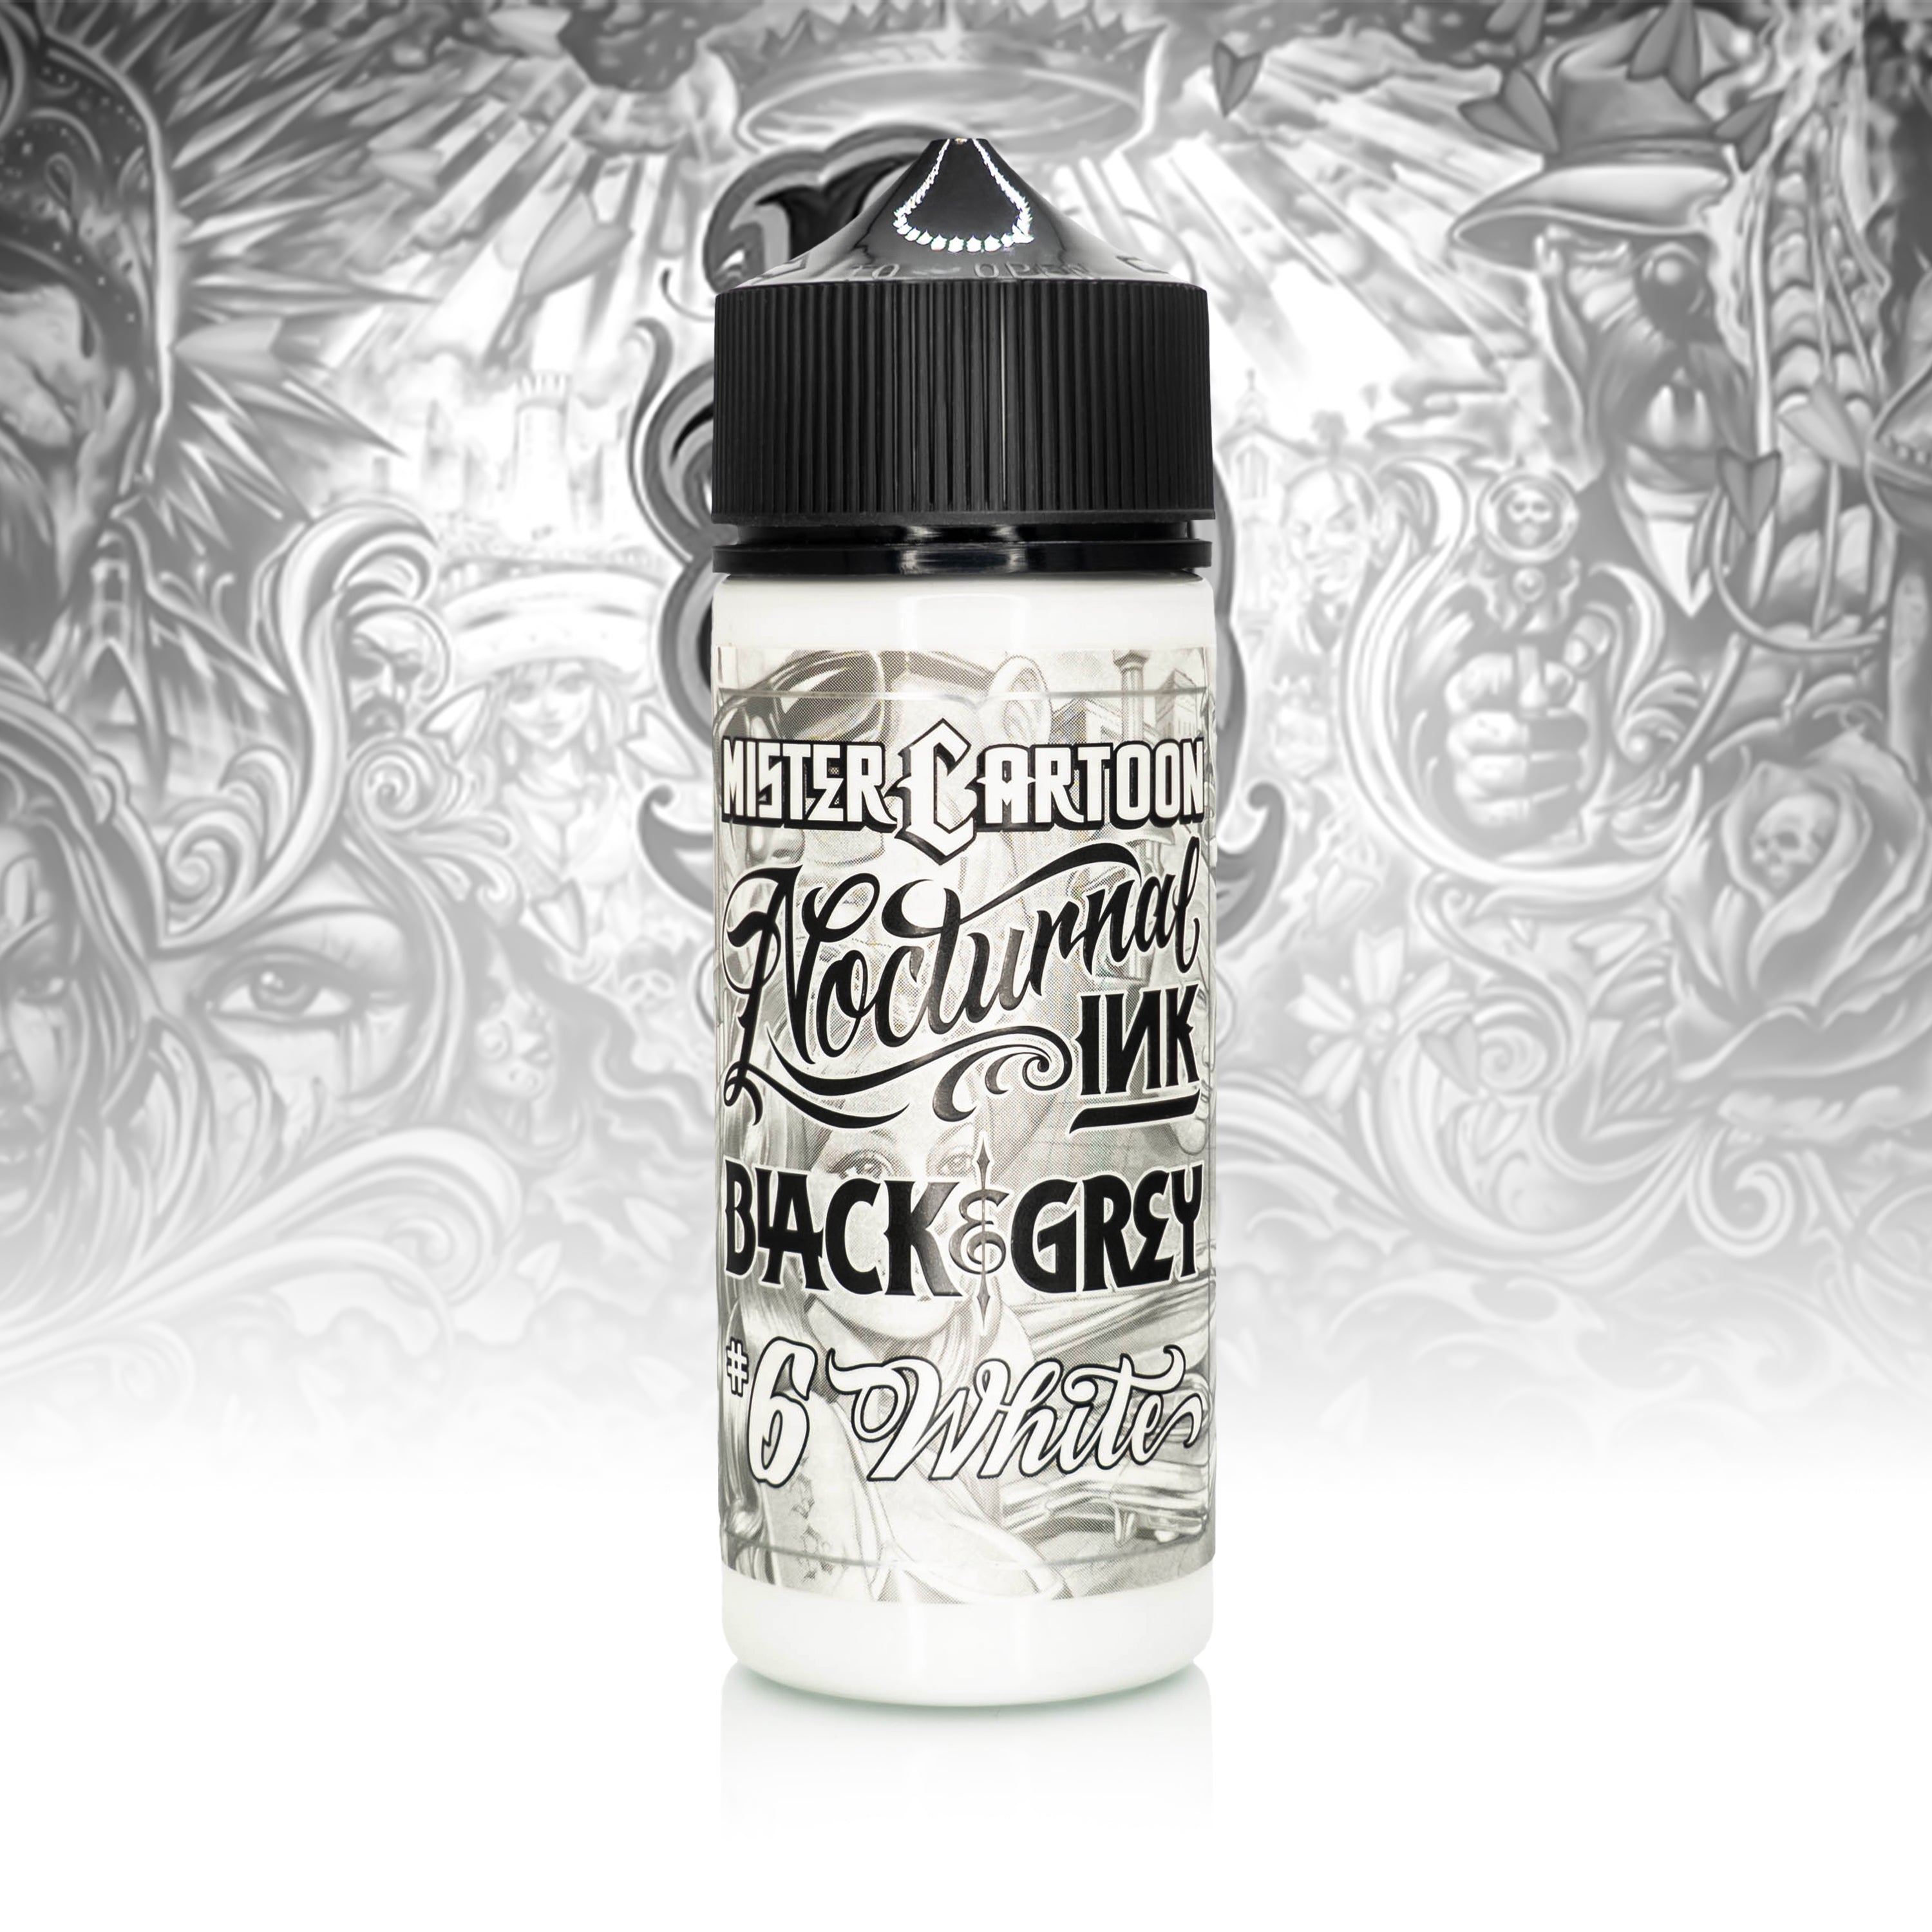 World Famous Tattoo Ink -Expired product - Sold at a special price